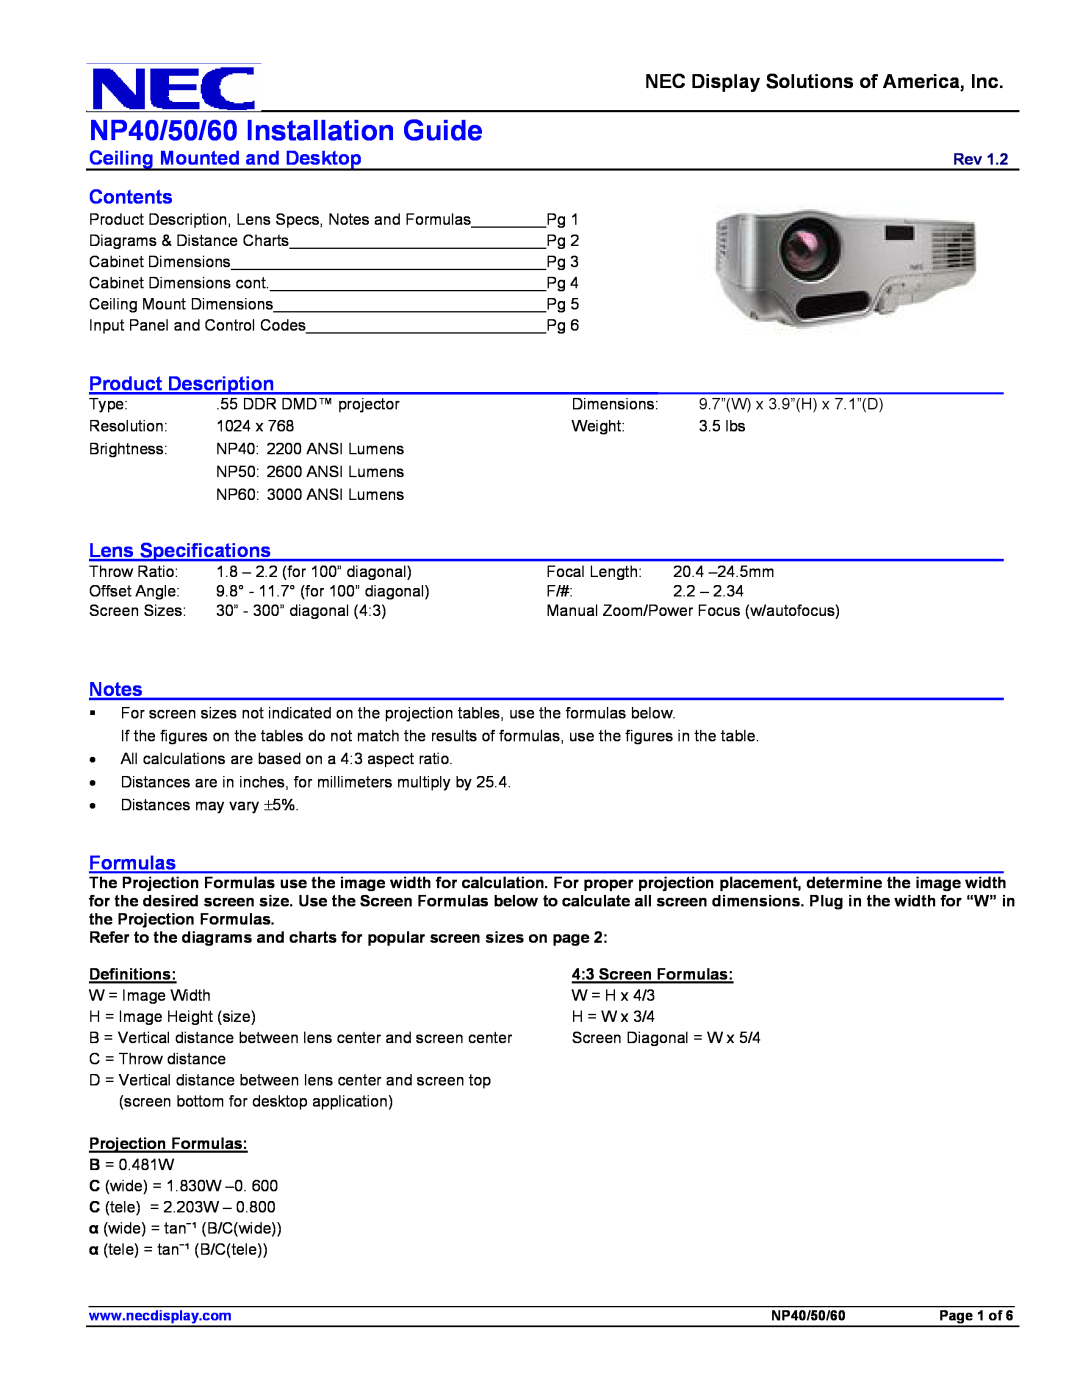 NEC specifications NP40/50/60 Installation Guide, Ceiling Mounted and Desktop, Contents, Product Description, Formulas 